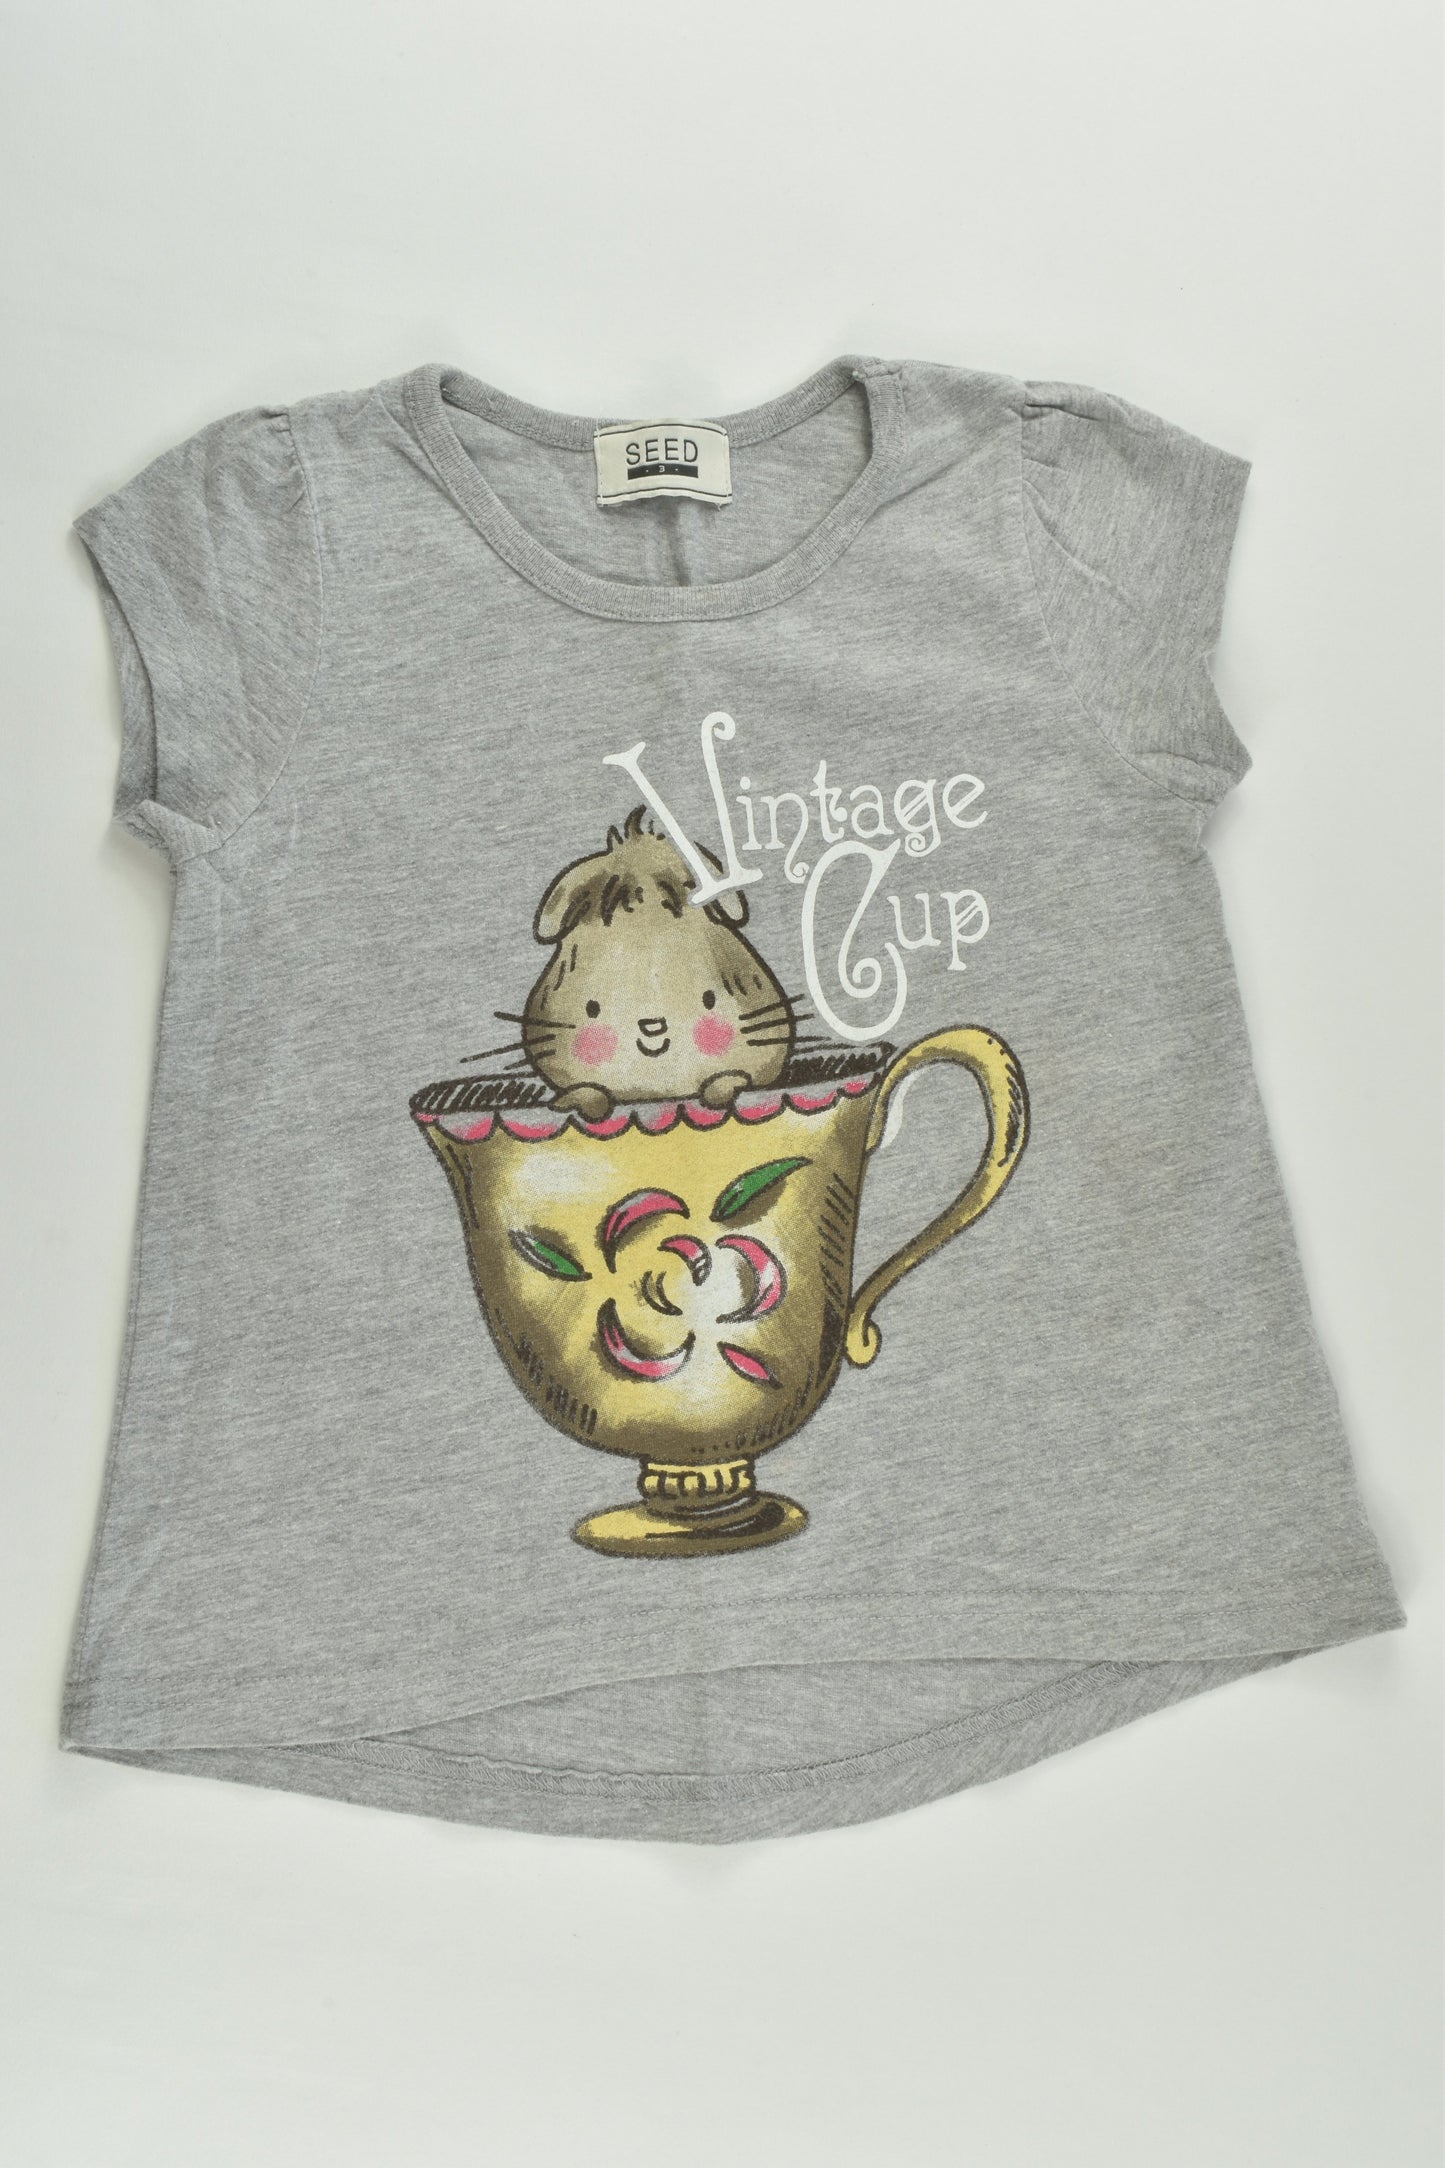 Seed by Padini Size 3 'Vintage Cup' T-shirt